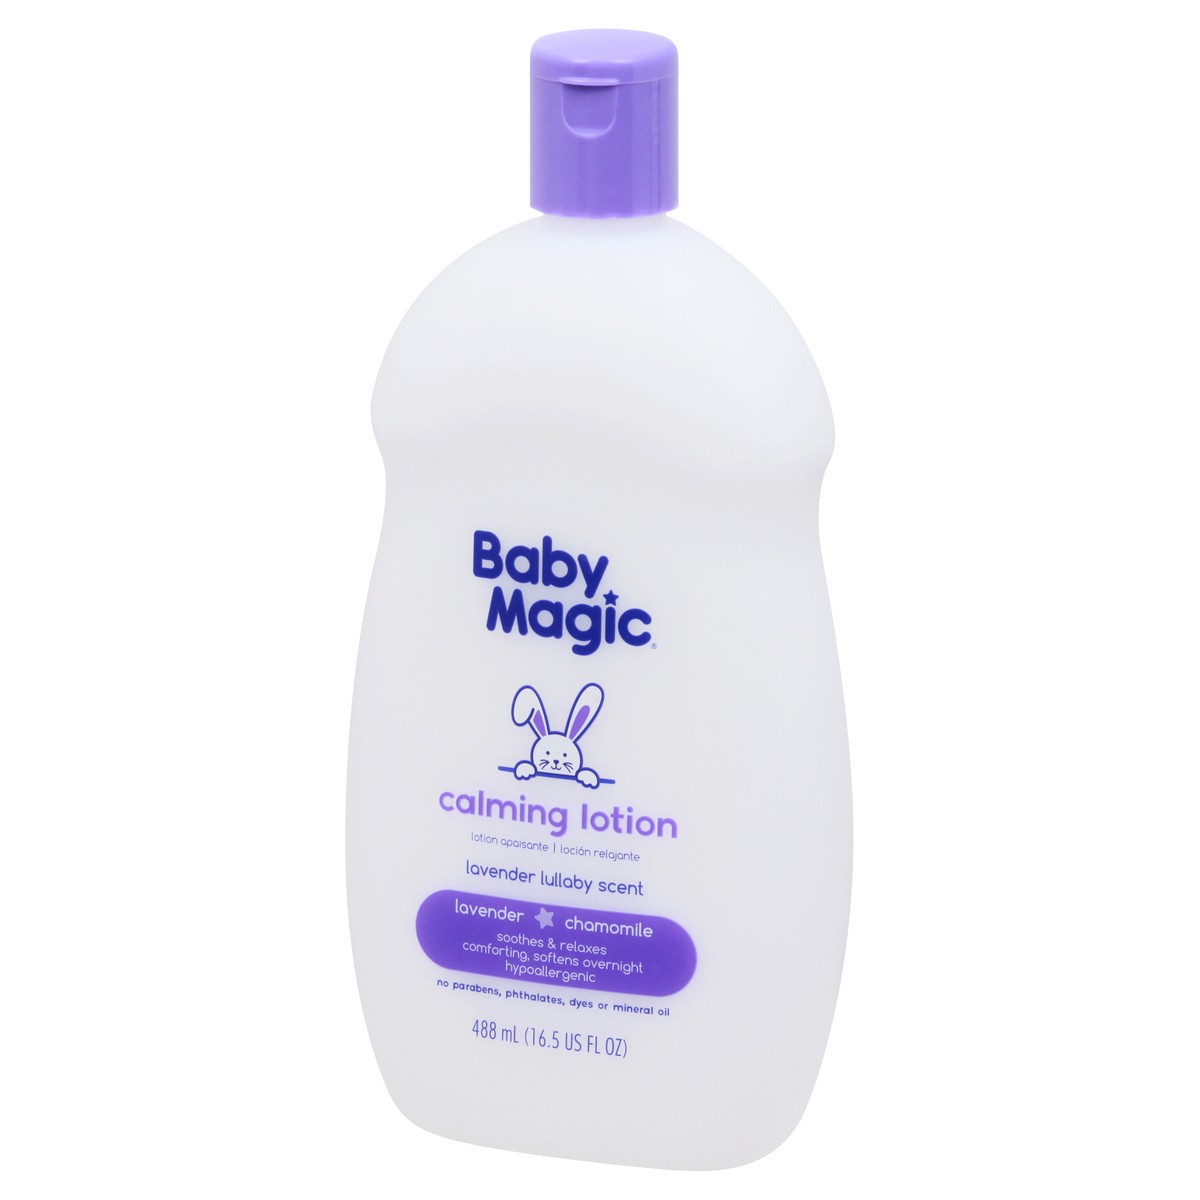 slide 3 of 9, Baby Magic Calming Lotion, Lavender Lulabby Scent, 16.5 oz